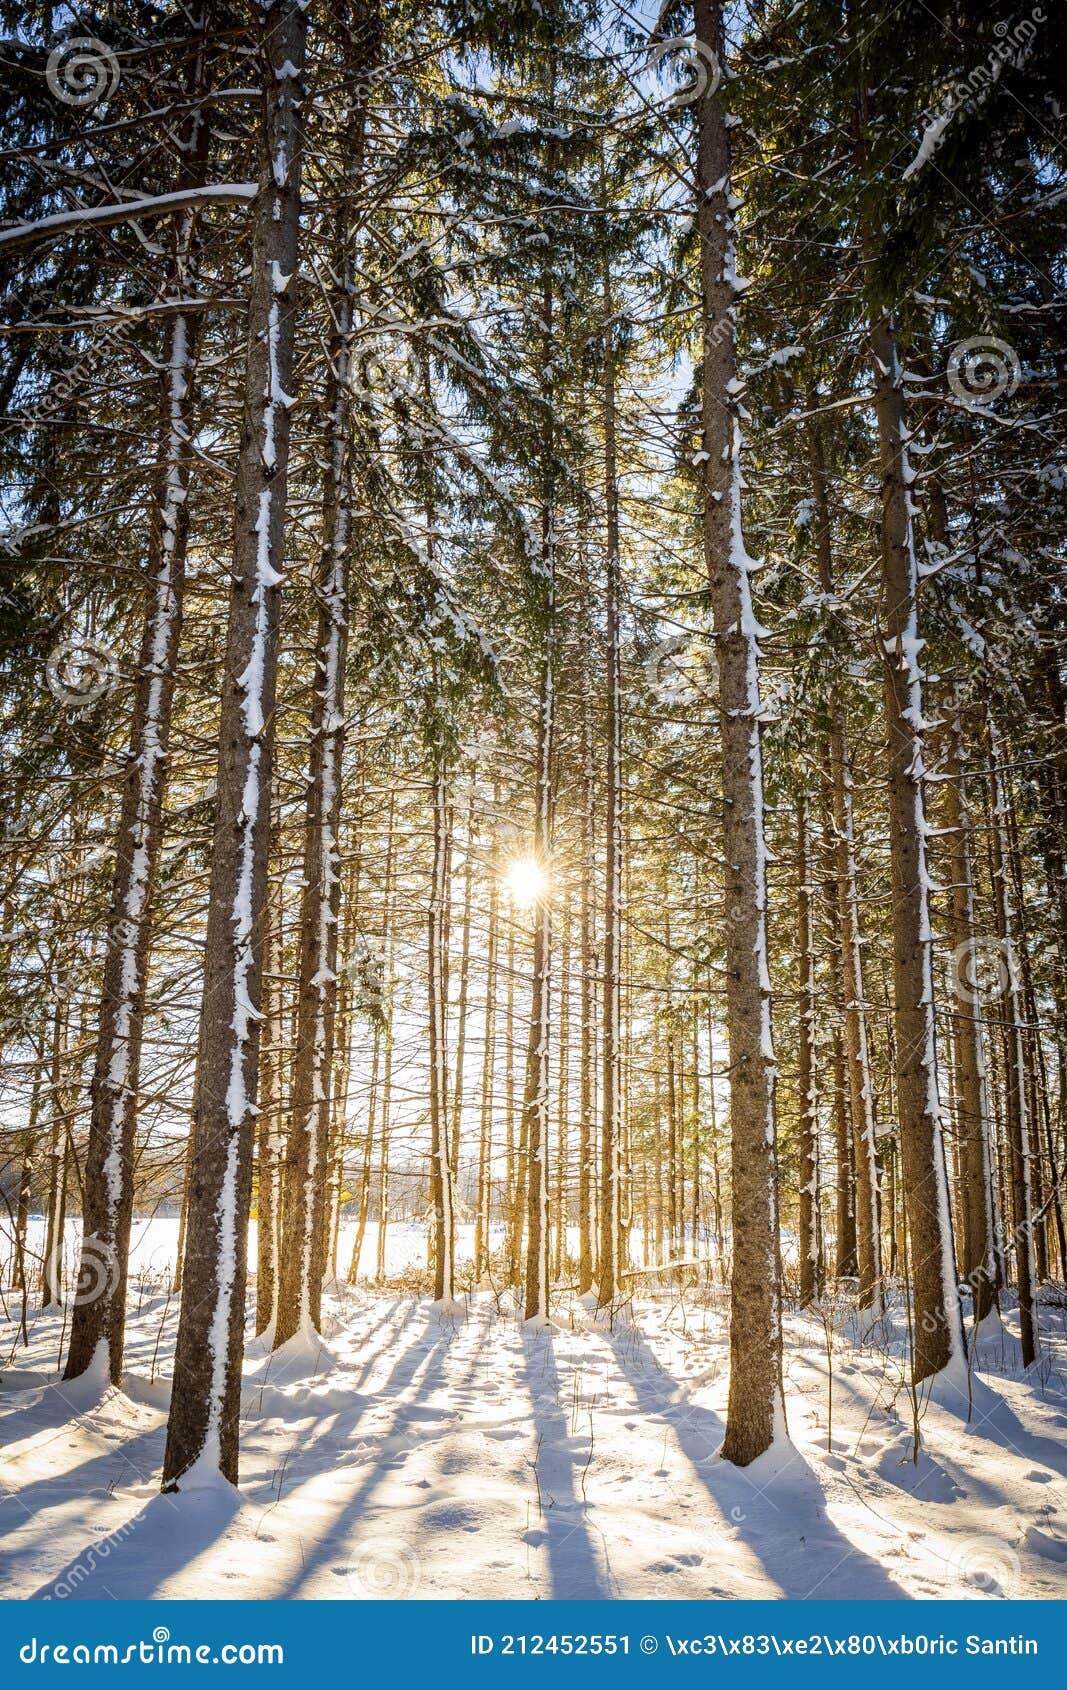 conifer forest in winter, quebec, canada